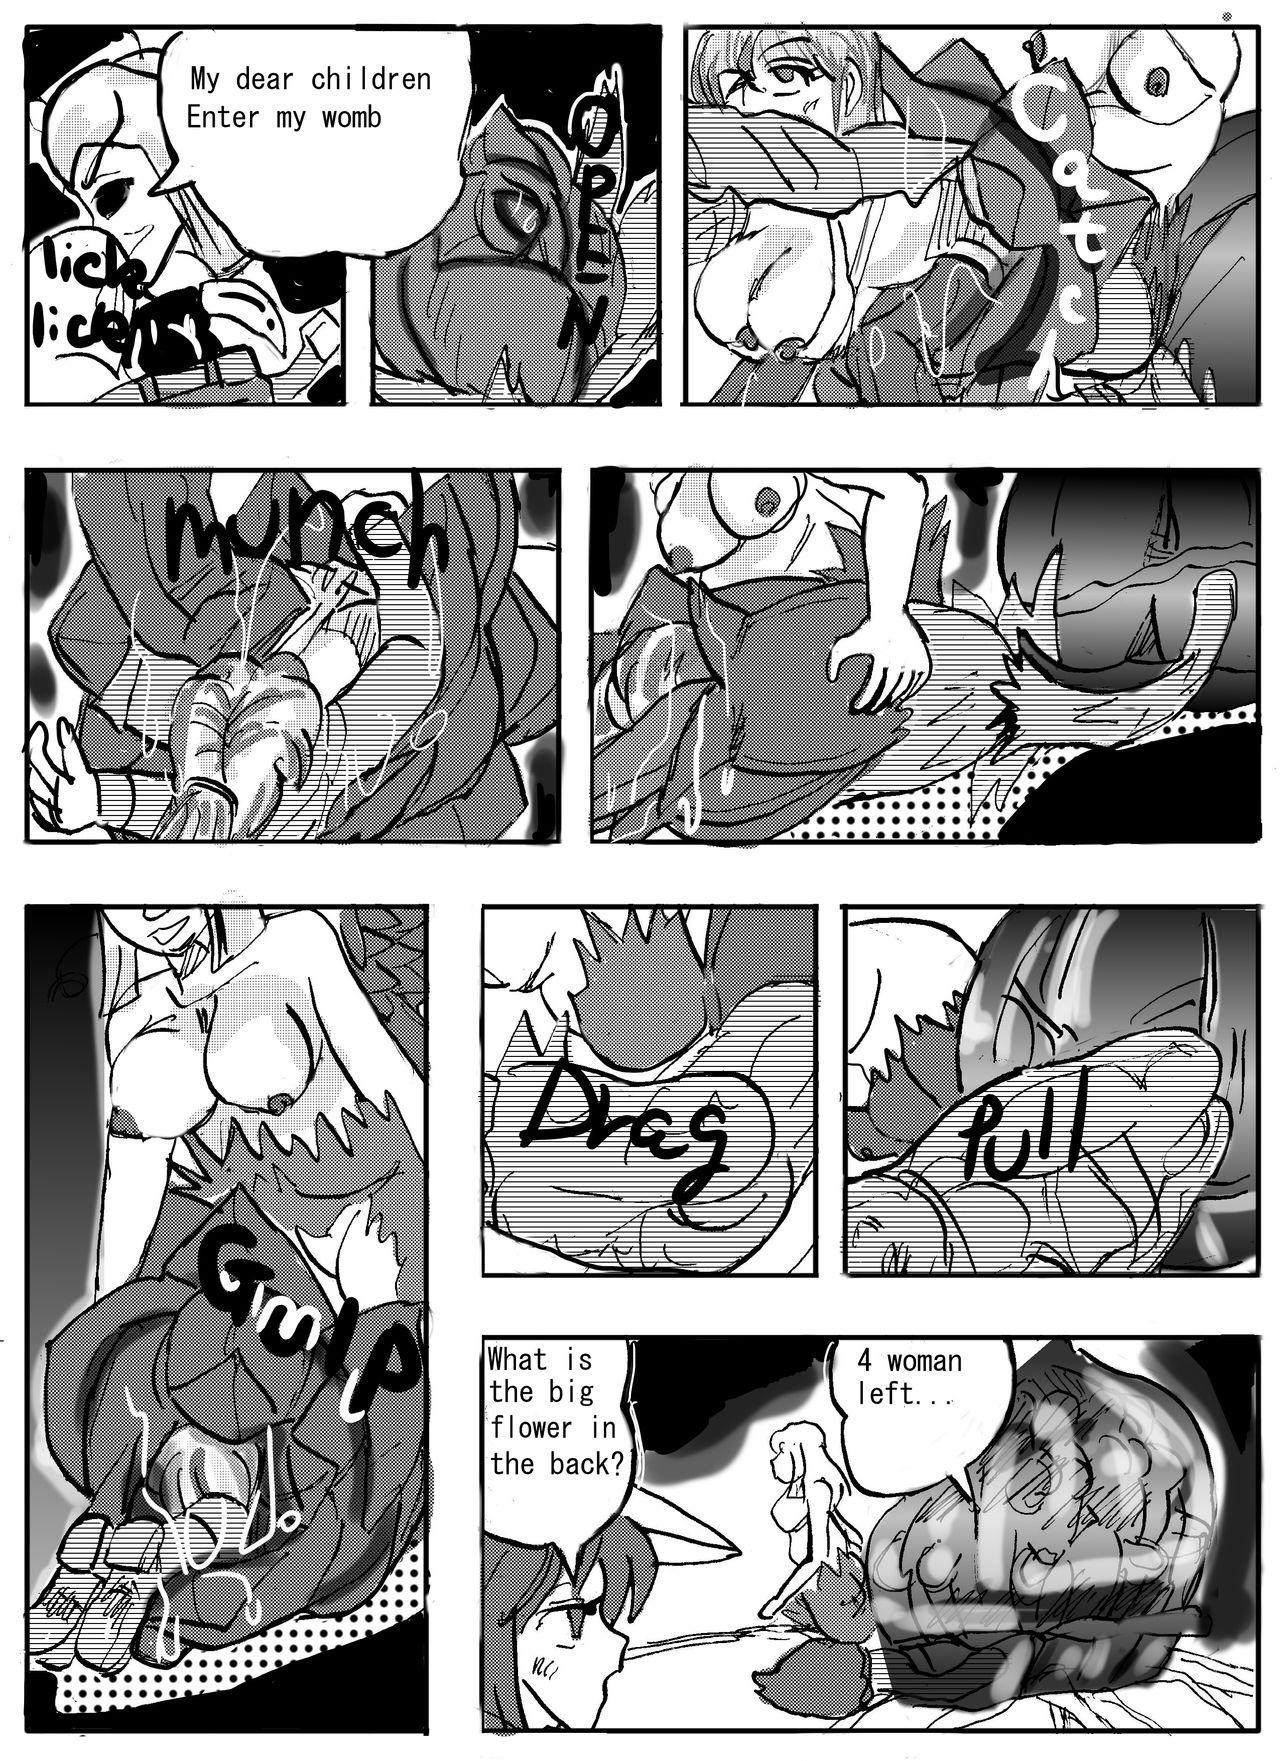 Rimming Flower vore "Human and plant heterosexual ra*e and seed bed" - Original Chupada - Page 7